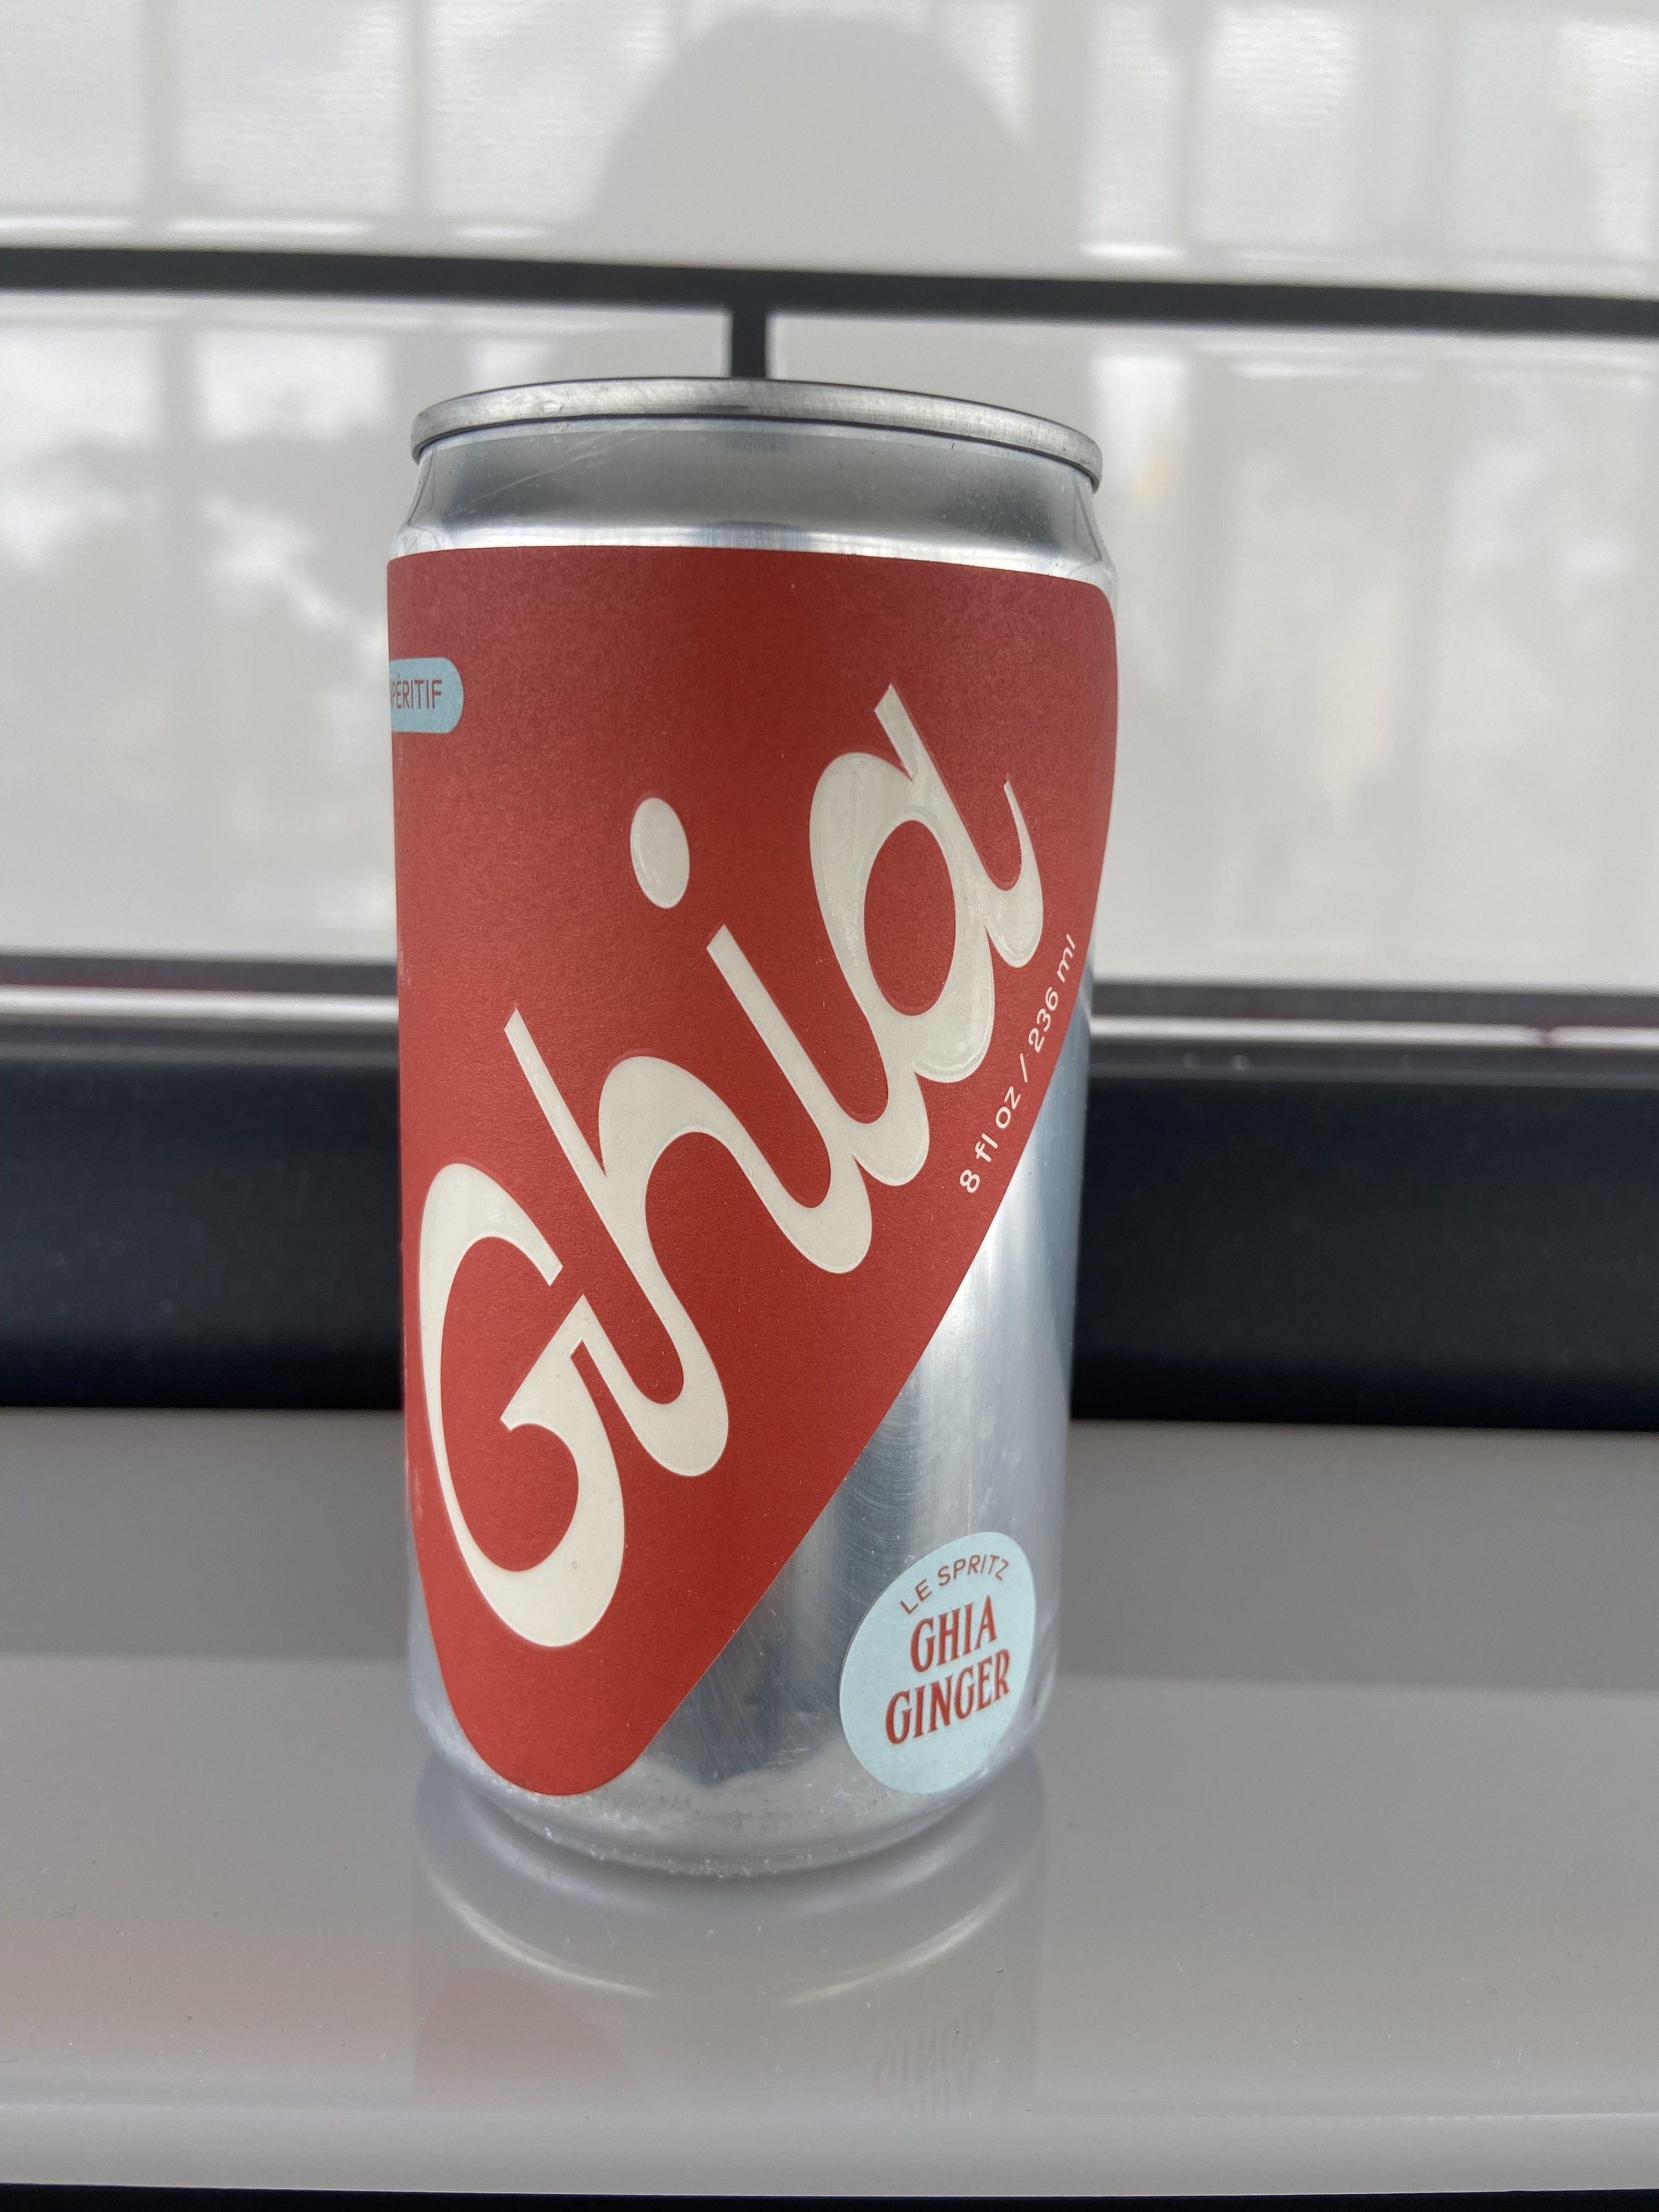 A can of Ghia Ginger